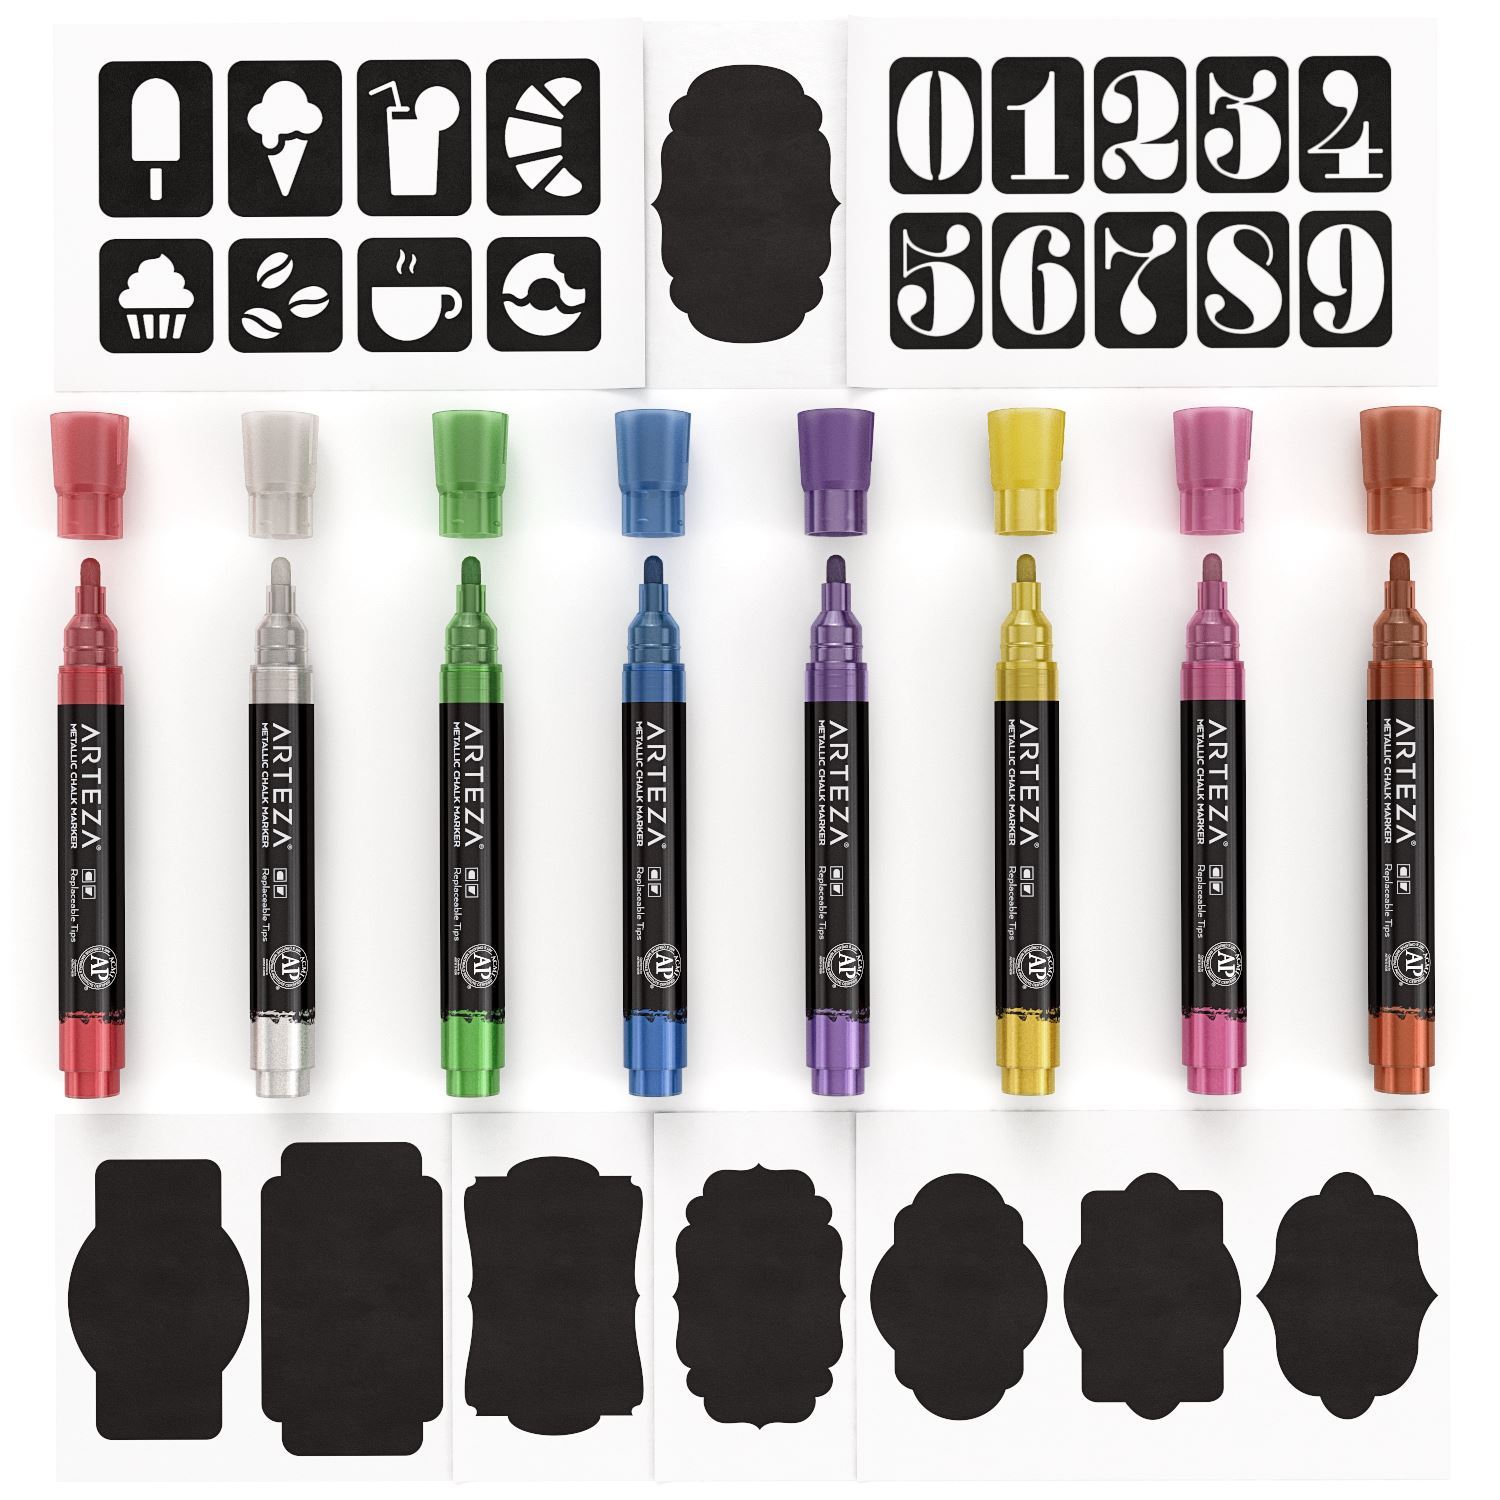 Arteza Liquid Chalk Markers, Water-Based 42-color Pack with 50 Chalkboard Labels